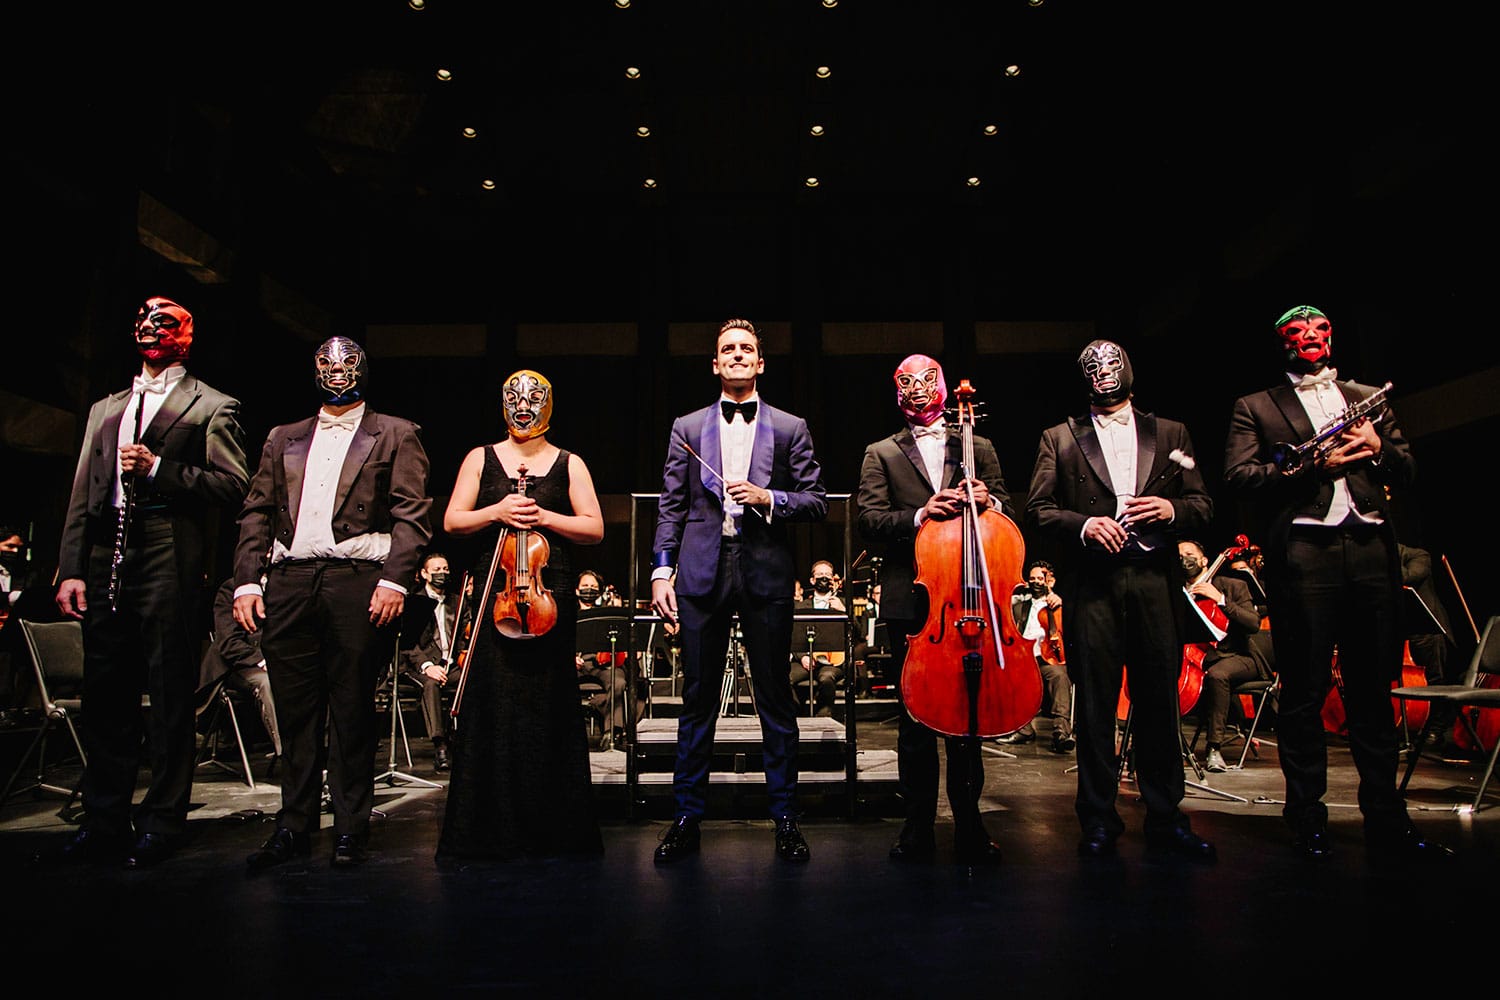 Six soloists wearing luchador masks stand either side of Juan Pablo Contreras on stage